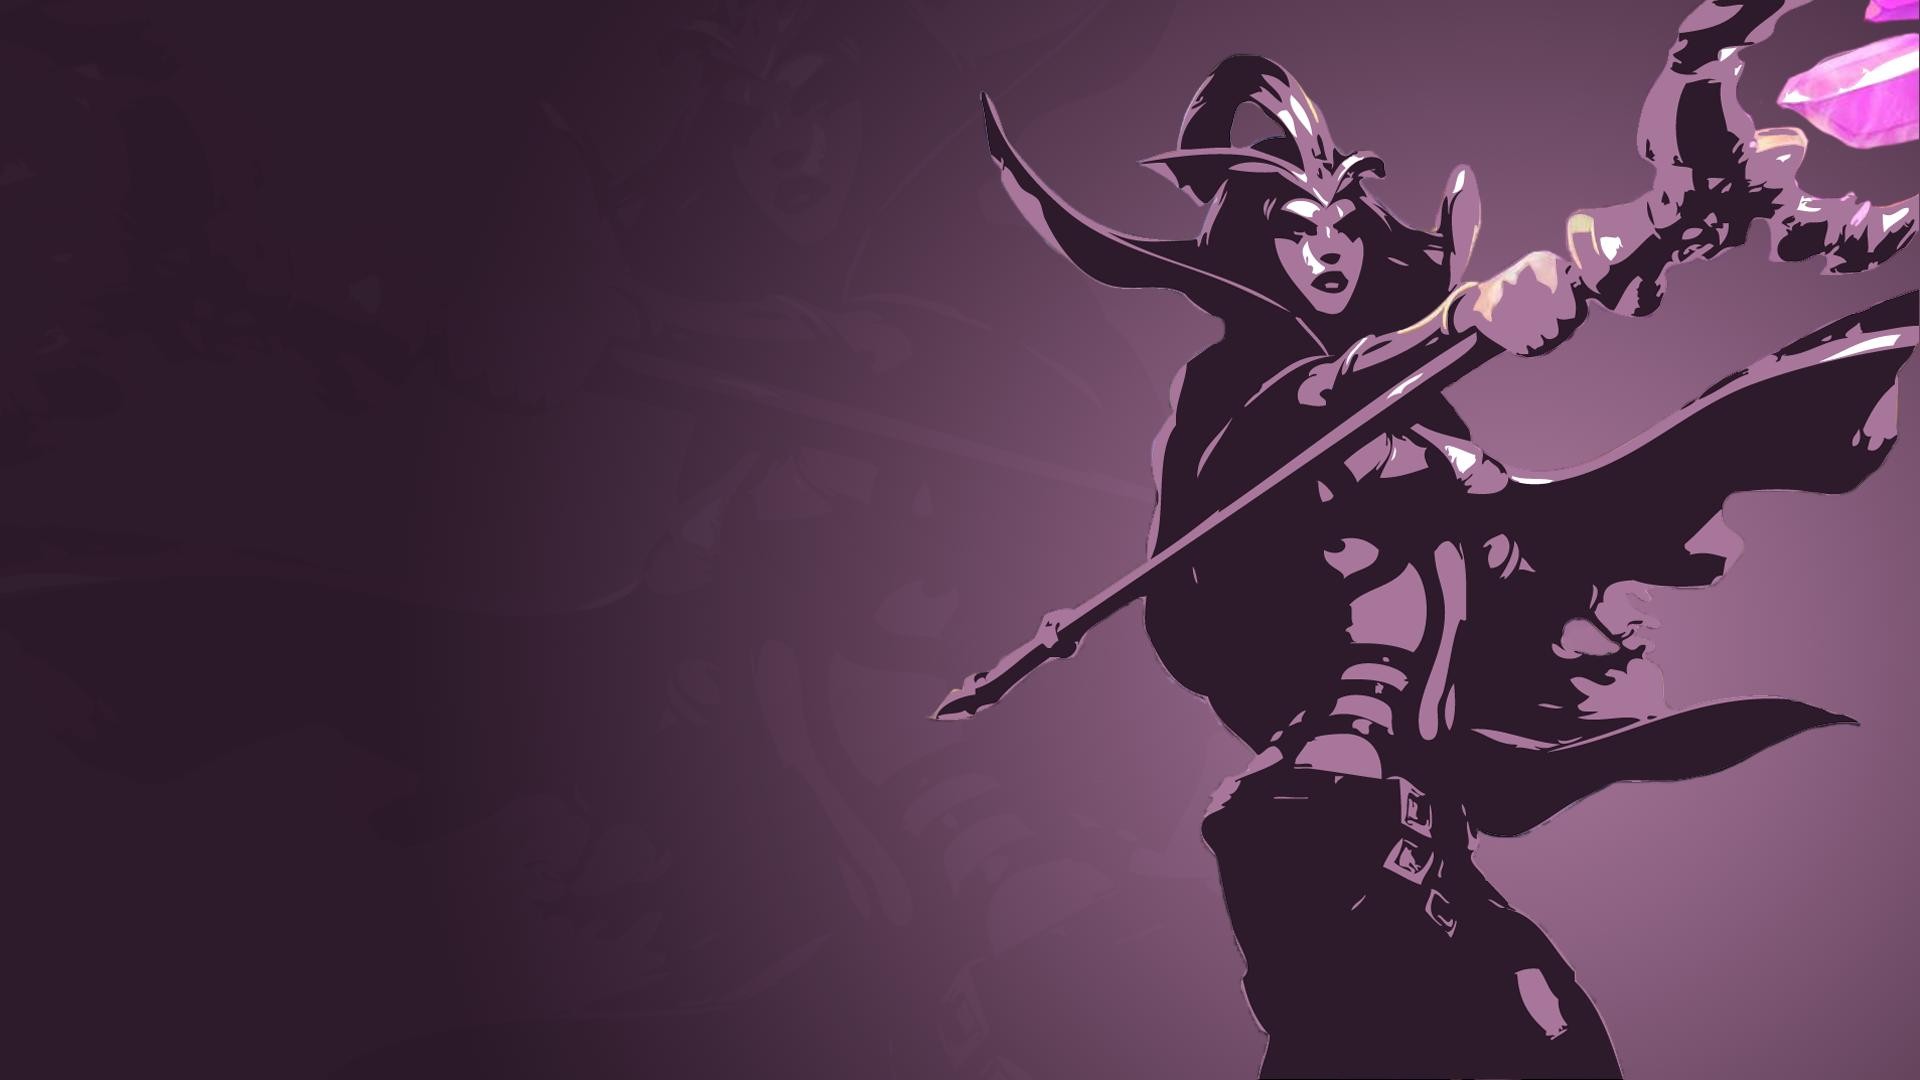 General 1920x1080 video games video game girls magician staff League of Legends LeBlanc (League of Legends) simple background minimalism women fantasy art fantasy girl PC gaming